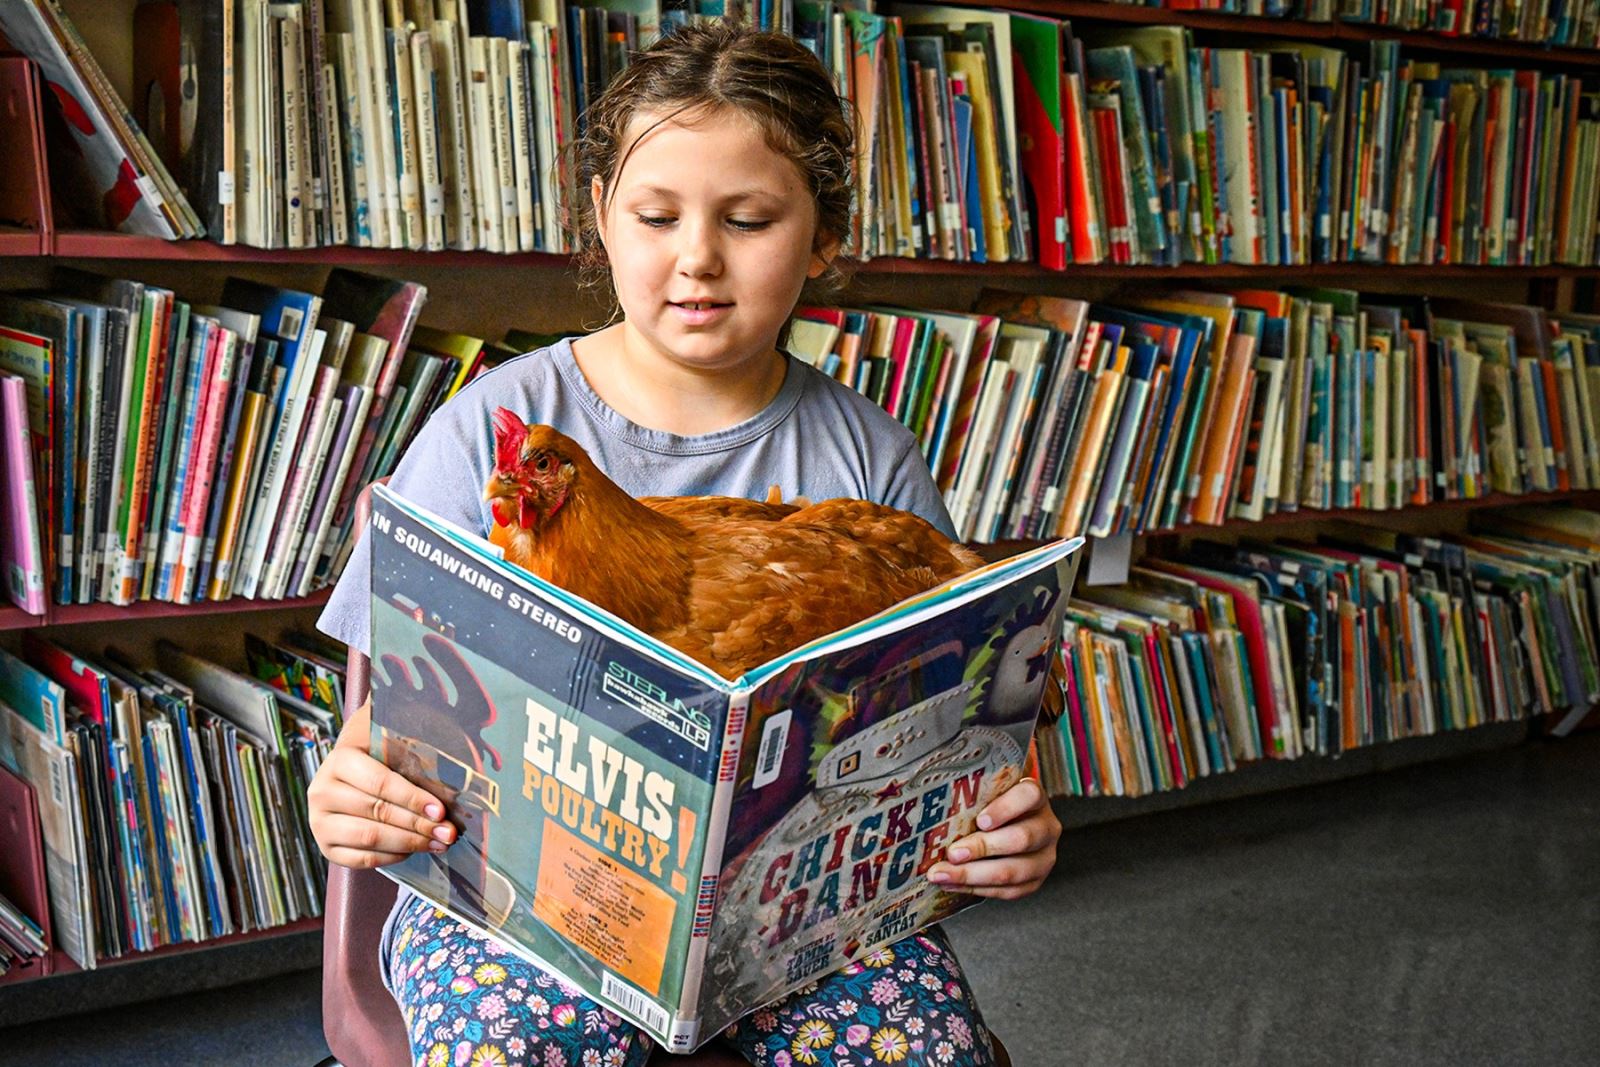 Lucy the chicken enjoys reading books, especially ones about chickens!